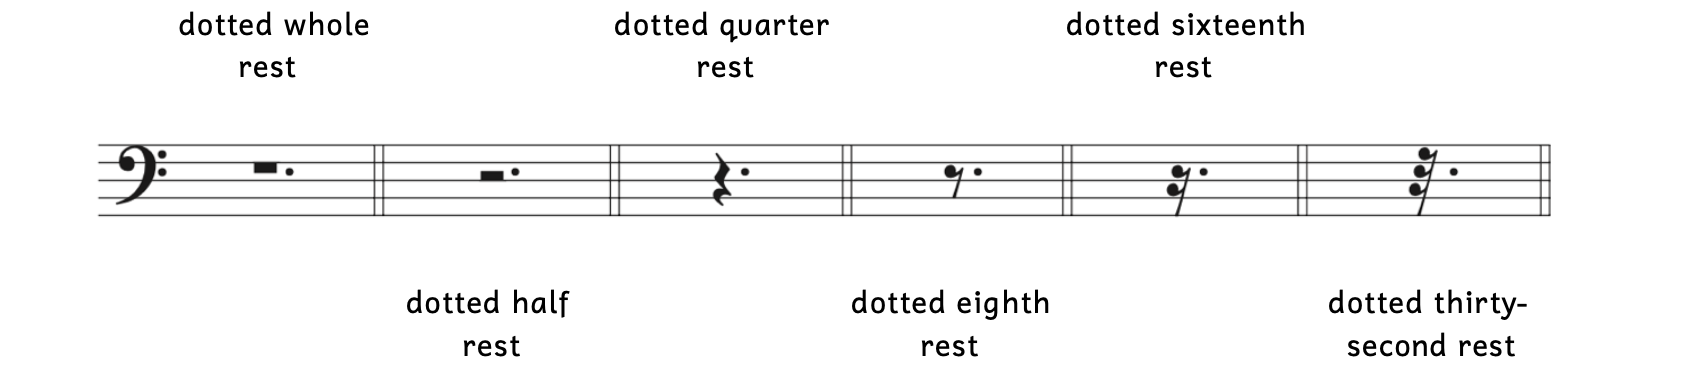 How different dotted rests are written on the staff. The dotted whole rest is in the third space, hanging from the fourth line, with the dot next to it. The dotted half rest is in the third space, sitting on the third line, with the dot next to it. The dotted quarter rest's dot is in the third space. The dotted eighth rest's dot is in the third space. The dotted sixteenth rest's dot is in the third space. The dotted thirty-second rest's dot is in the third space.